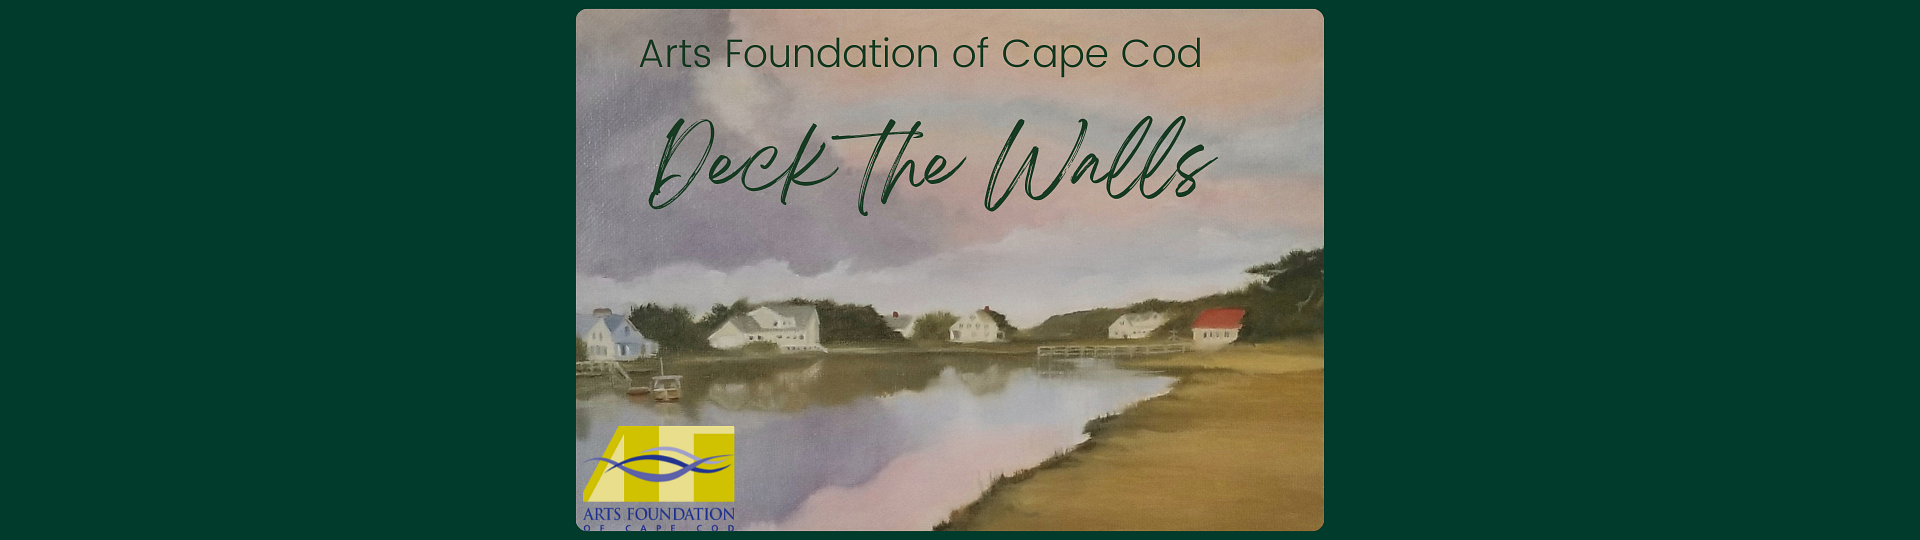 Deck the Walls Small Works Art Sale by Arts Foundation of Cape Cod